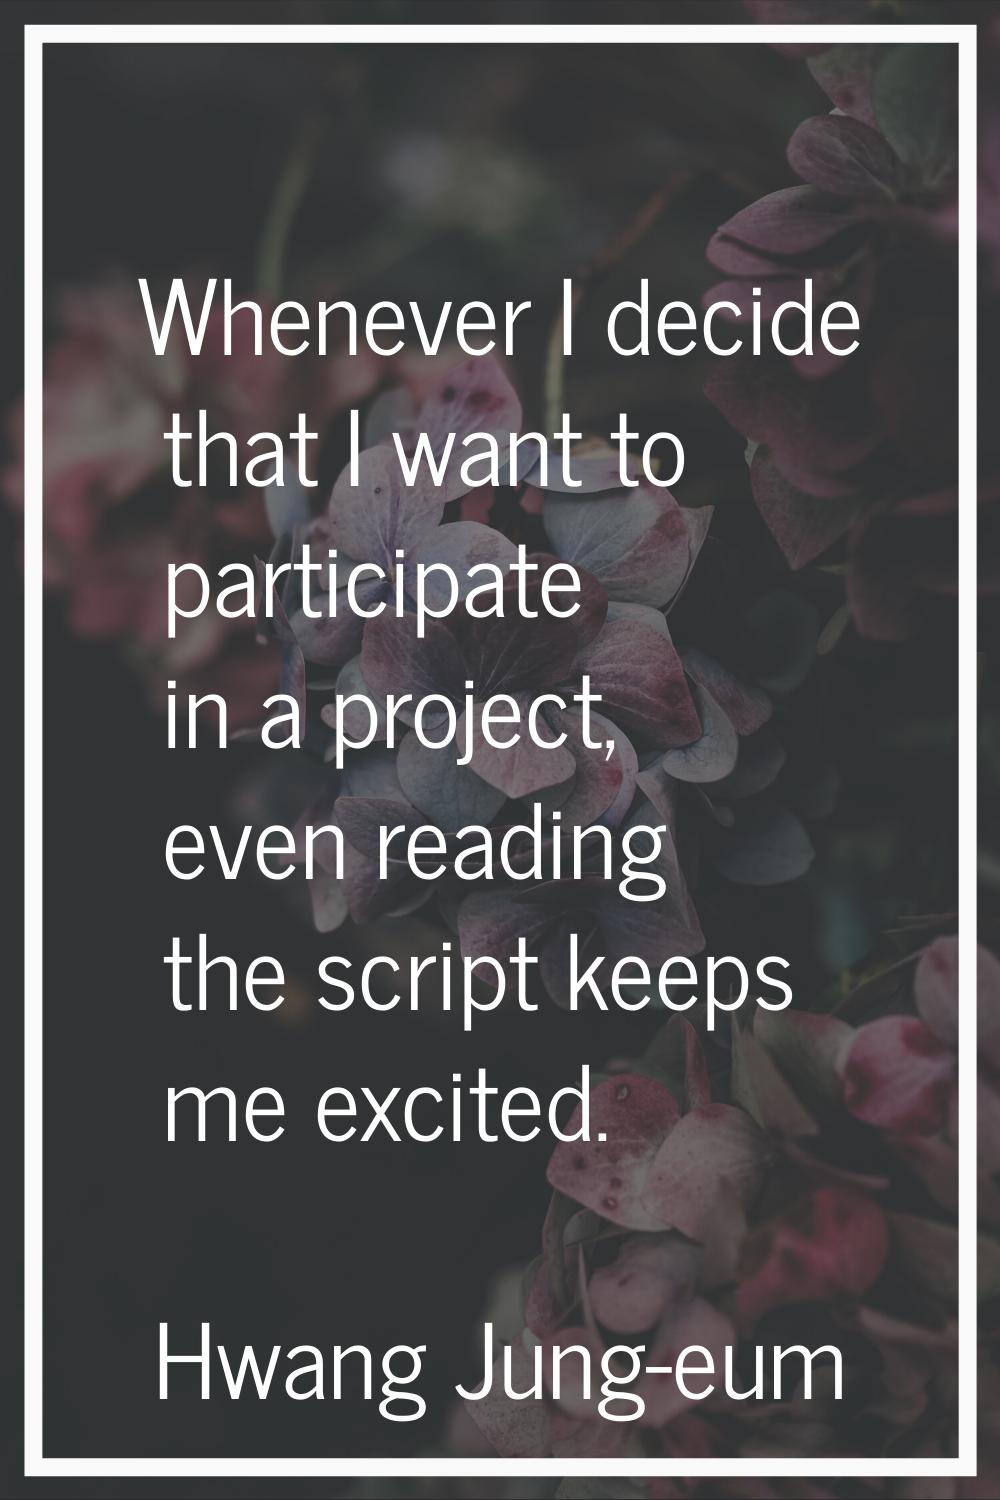 Whenever I decide that I want to participate in a project, even reading the script keeps me excited